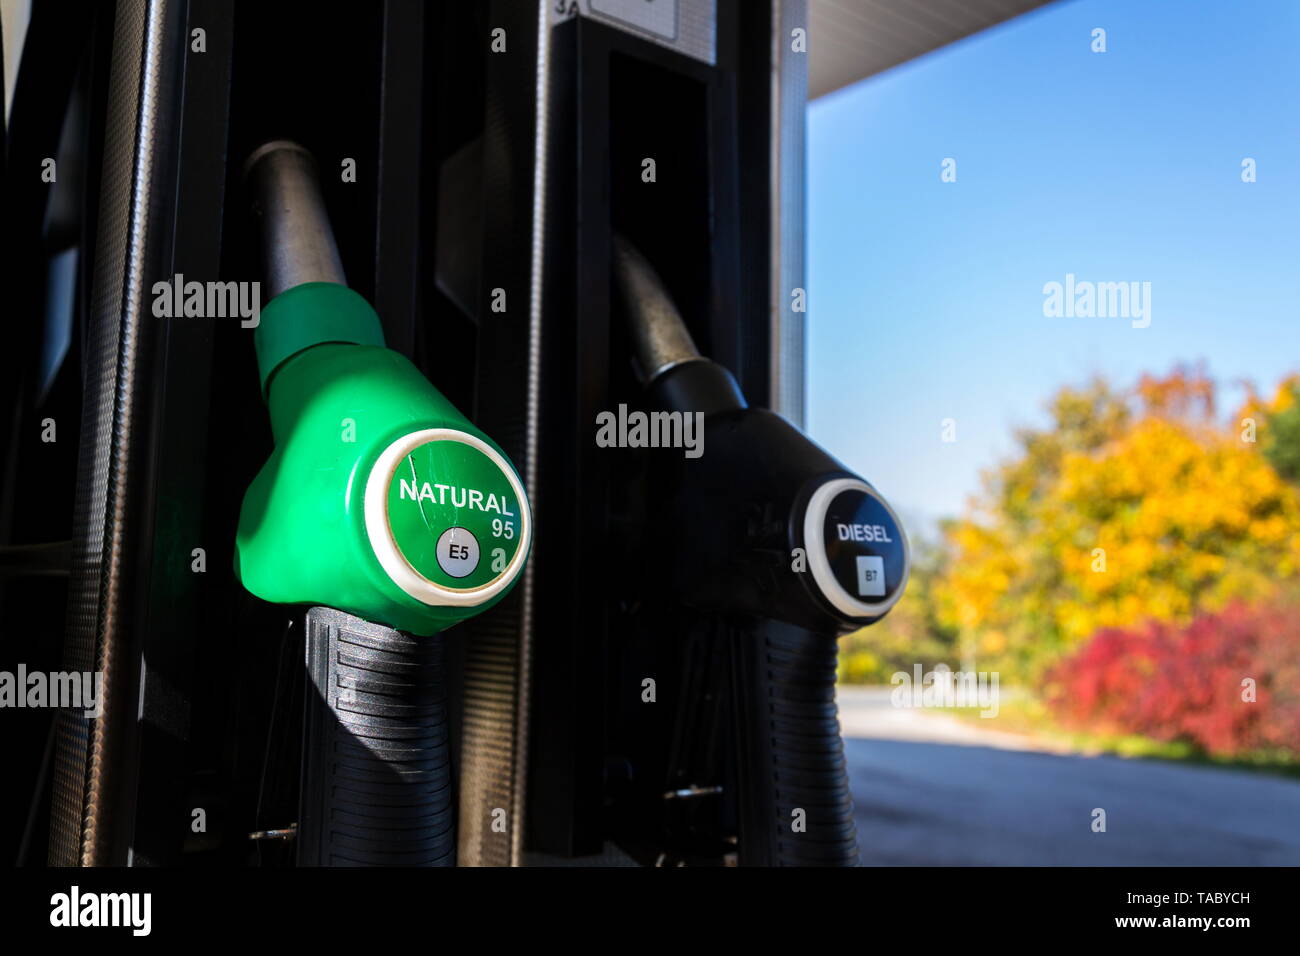 New fuel labeling at petrol station pumps with new EU labels, sunny day Stock Photo